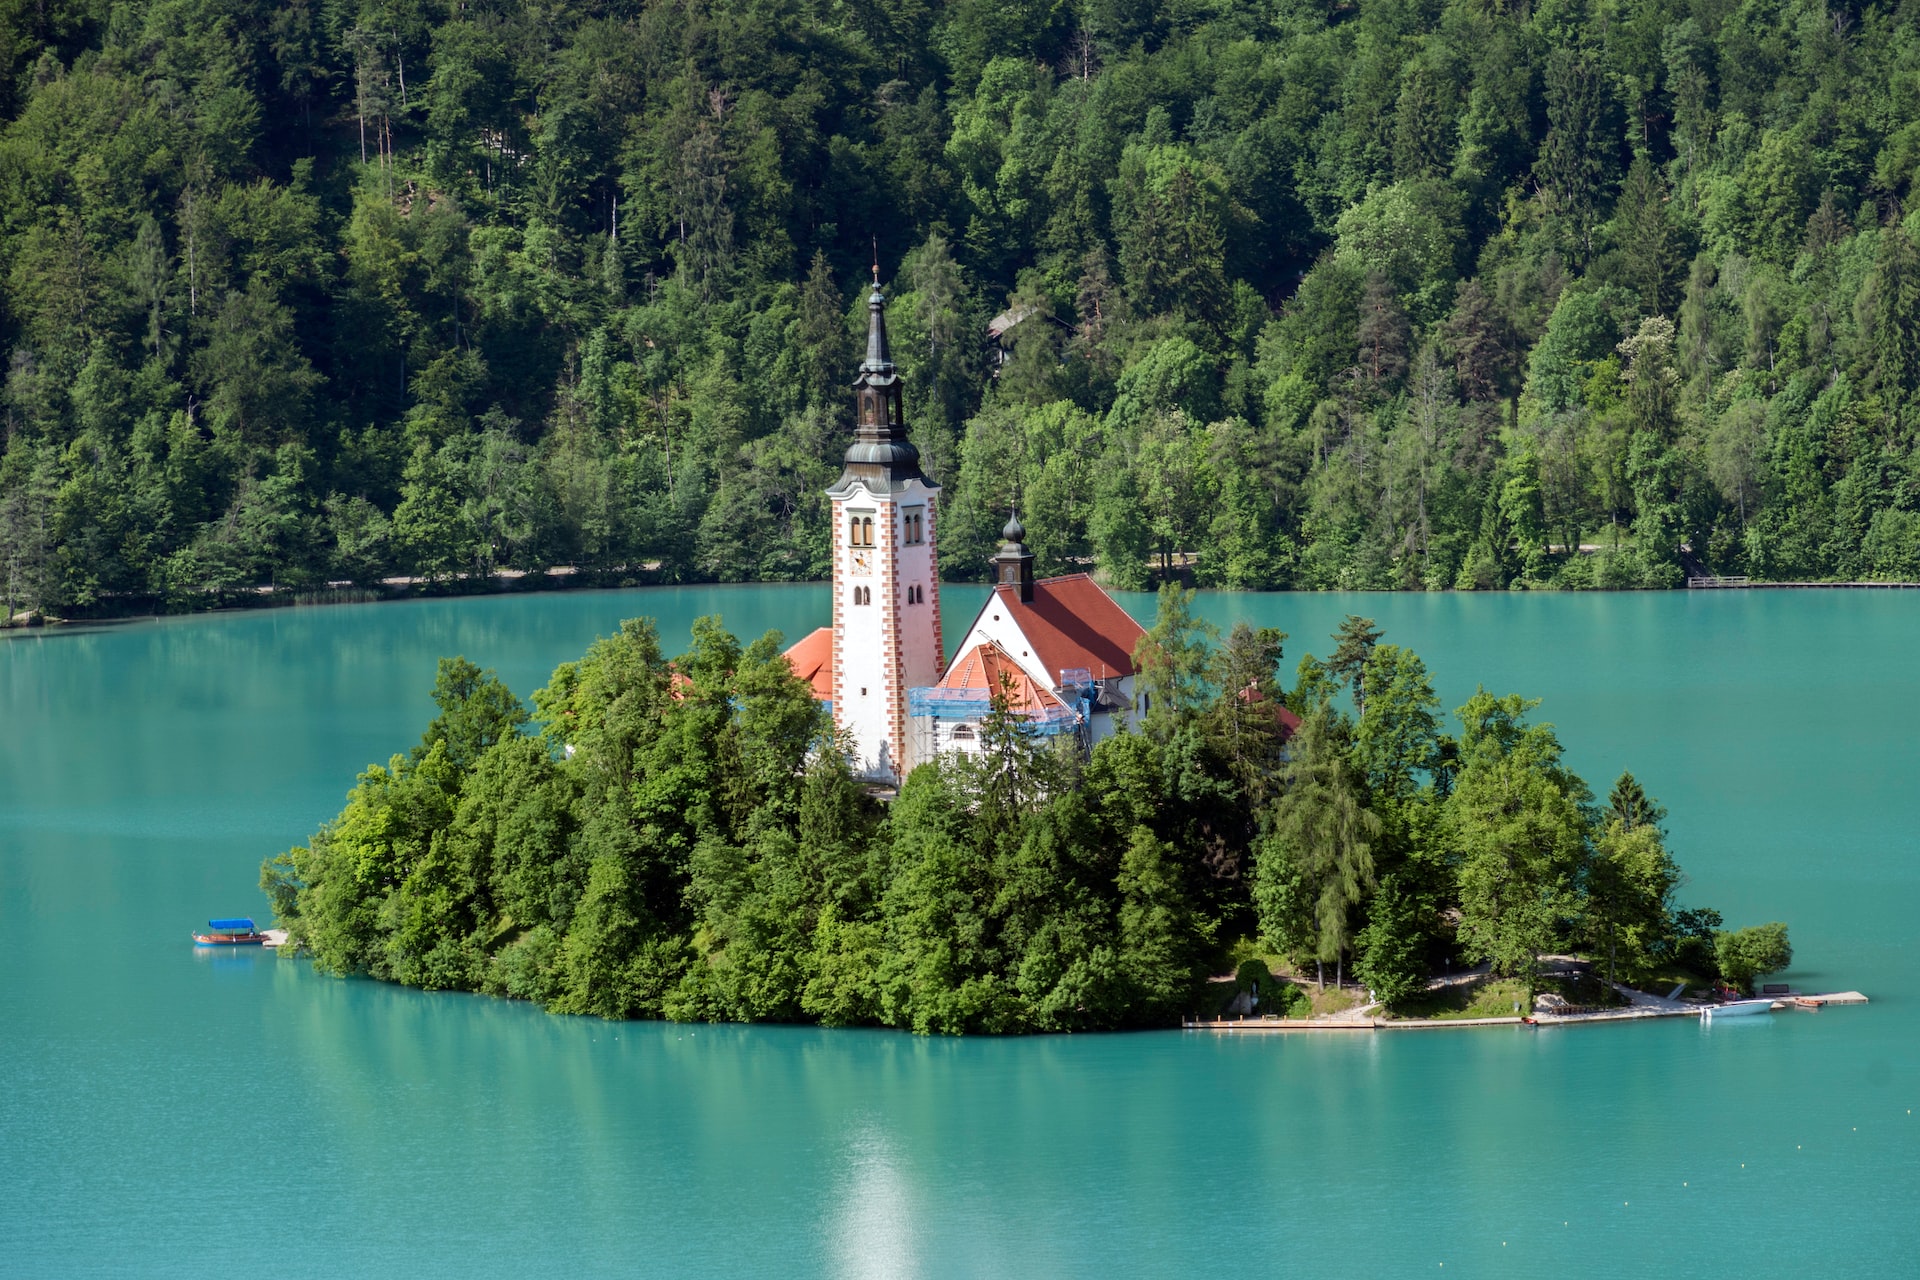 Glamping in Slovenia - Lake Bled